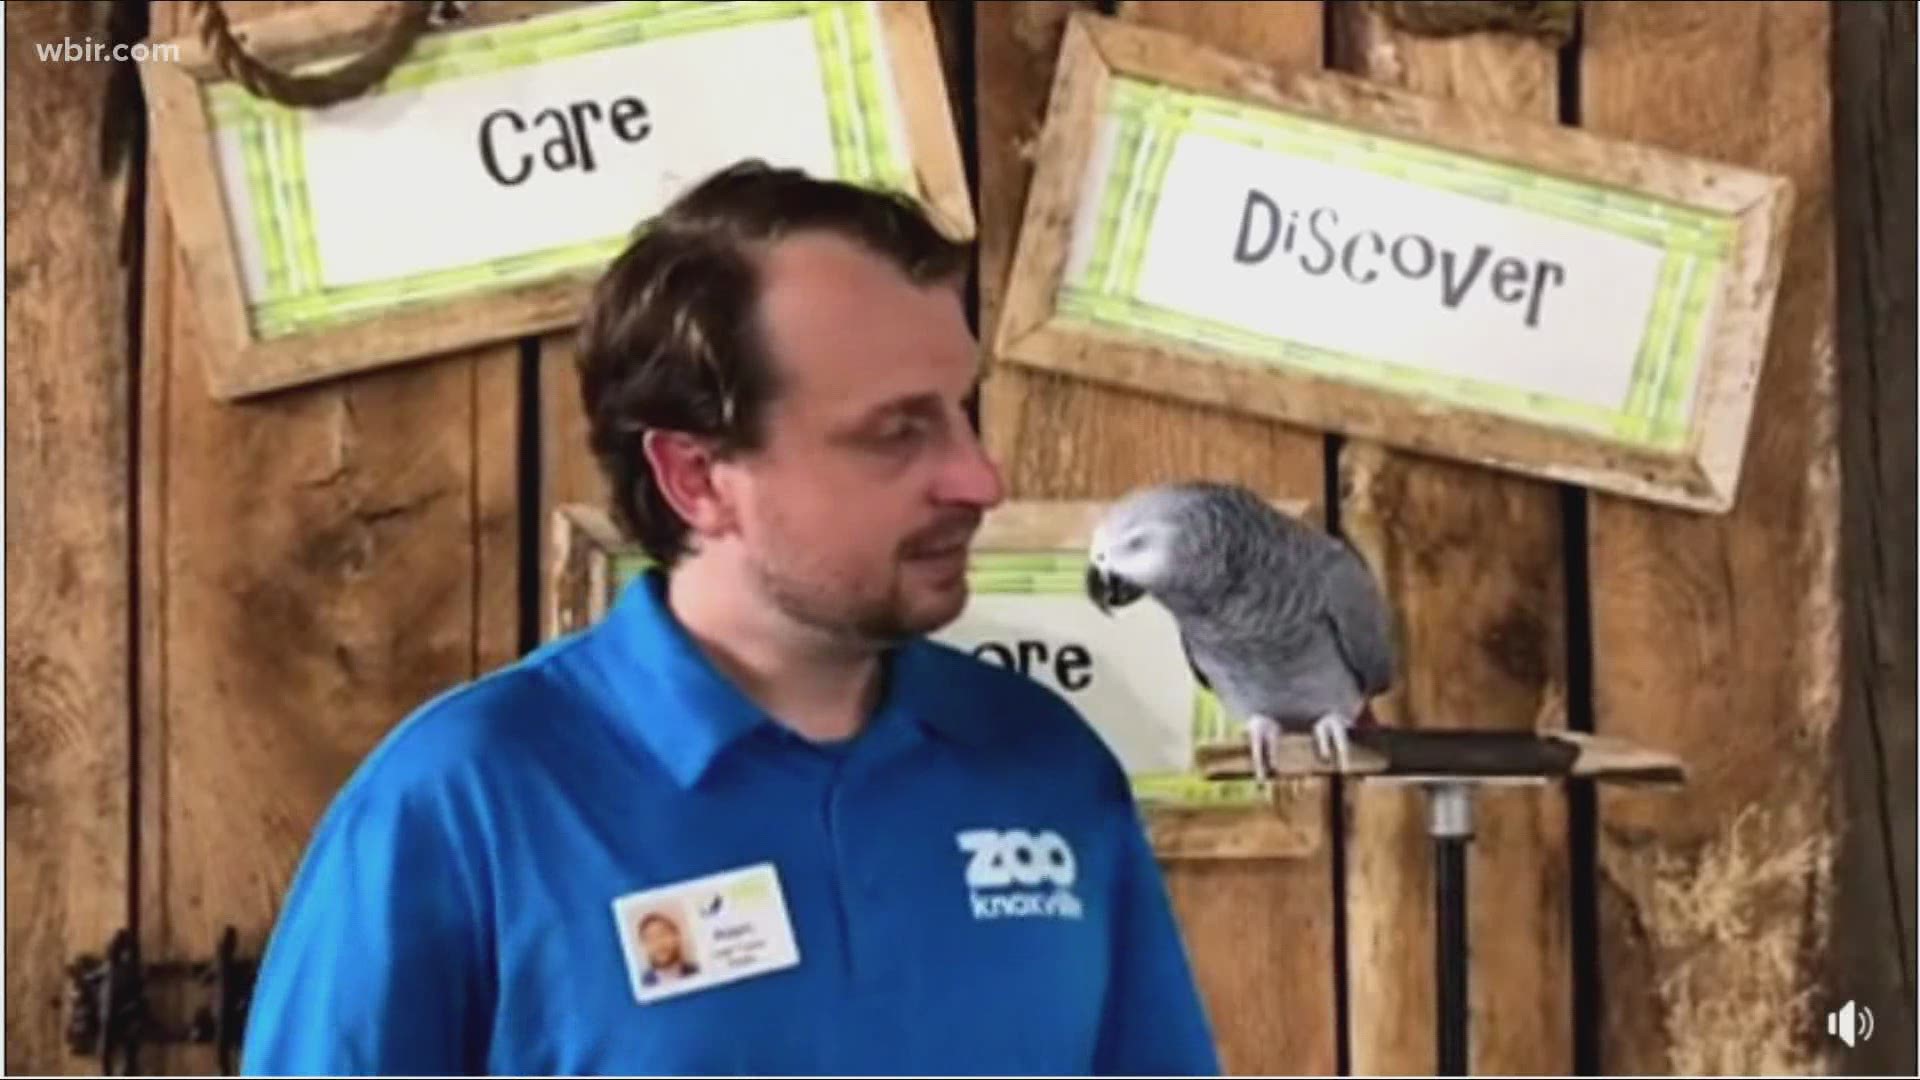 Einstein the African Parrot, one smart bird, now is offering personalized messages - for a price.